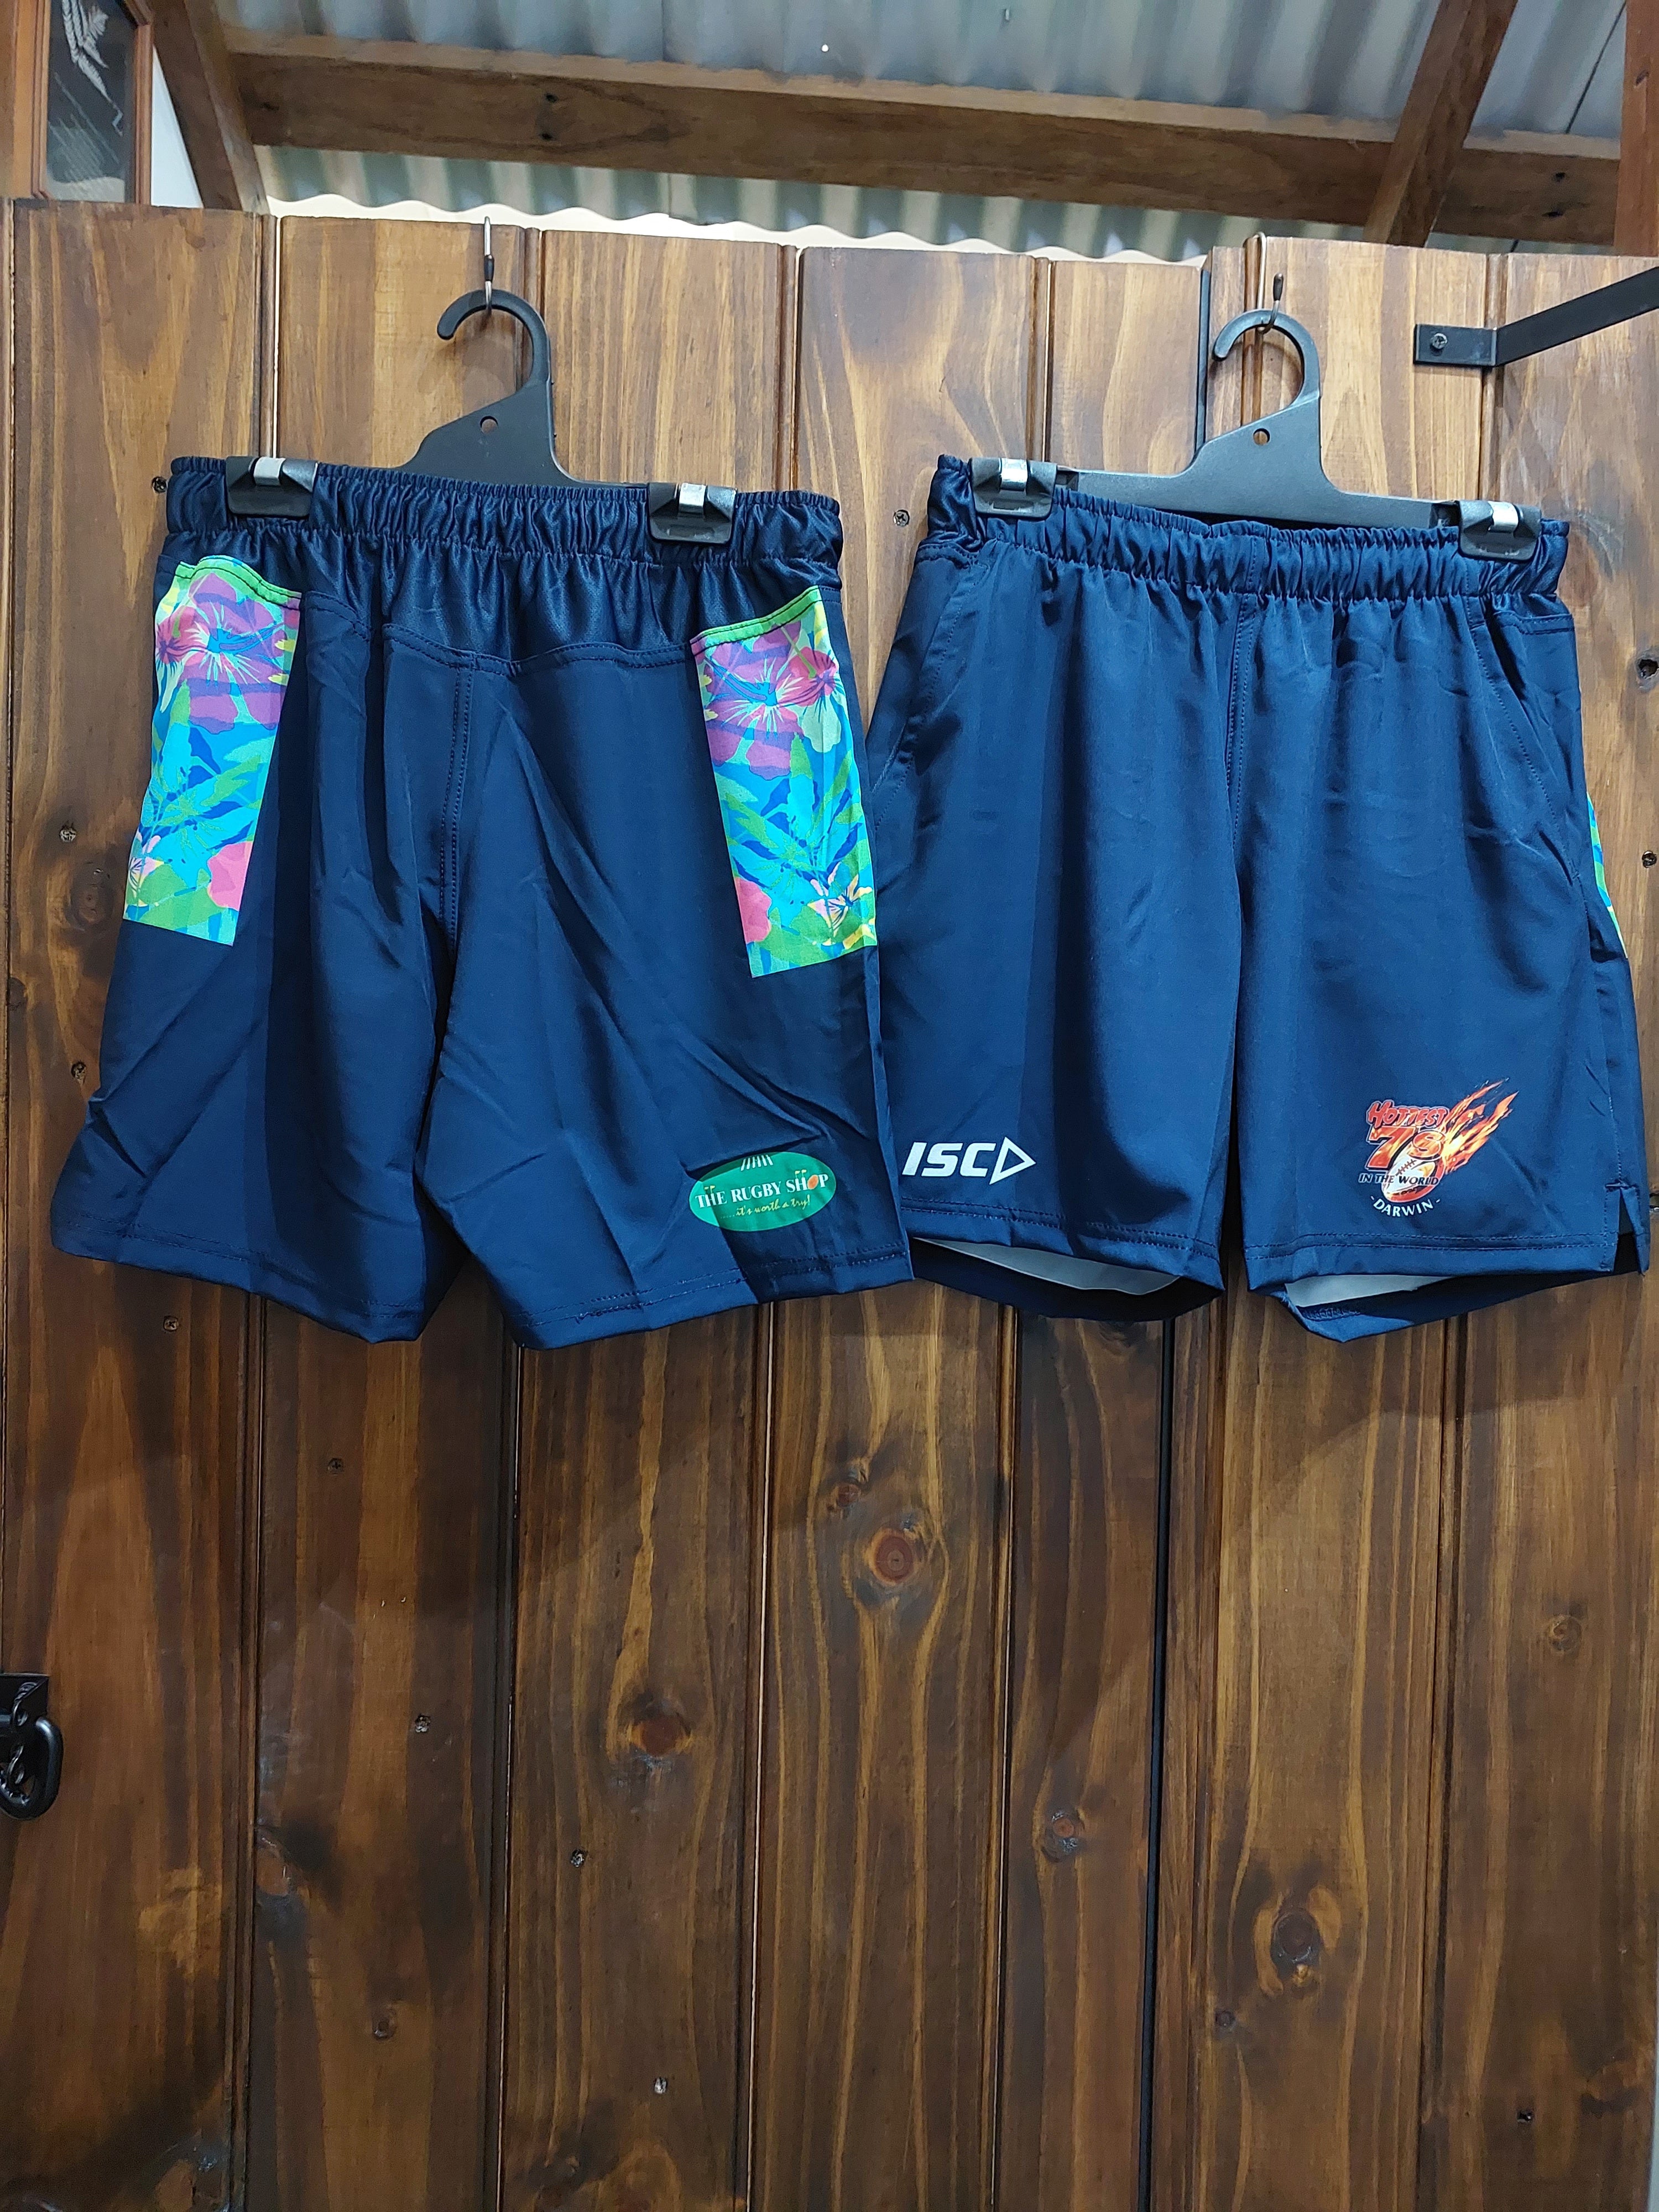 Hottest 7s Shorts 22 - The Rugby Shop Darwin